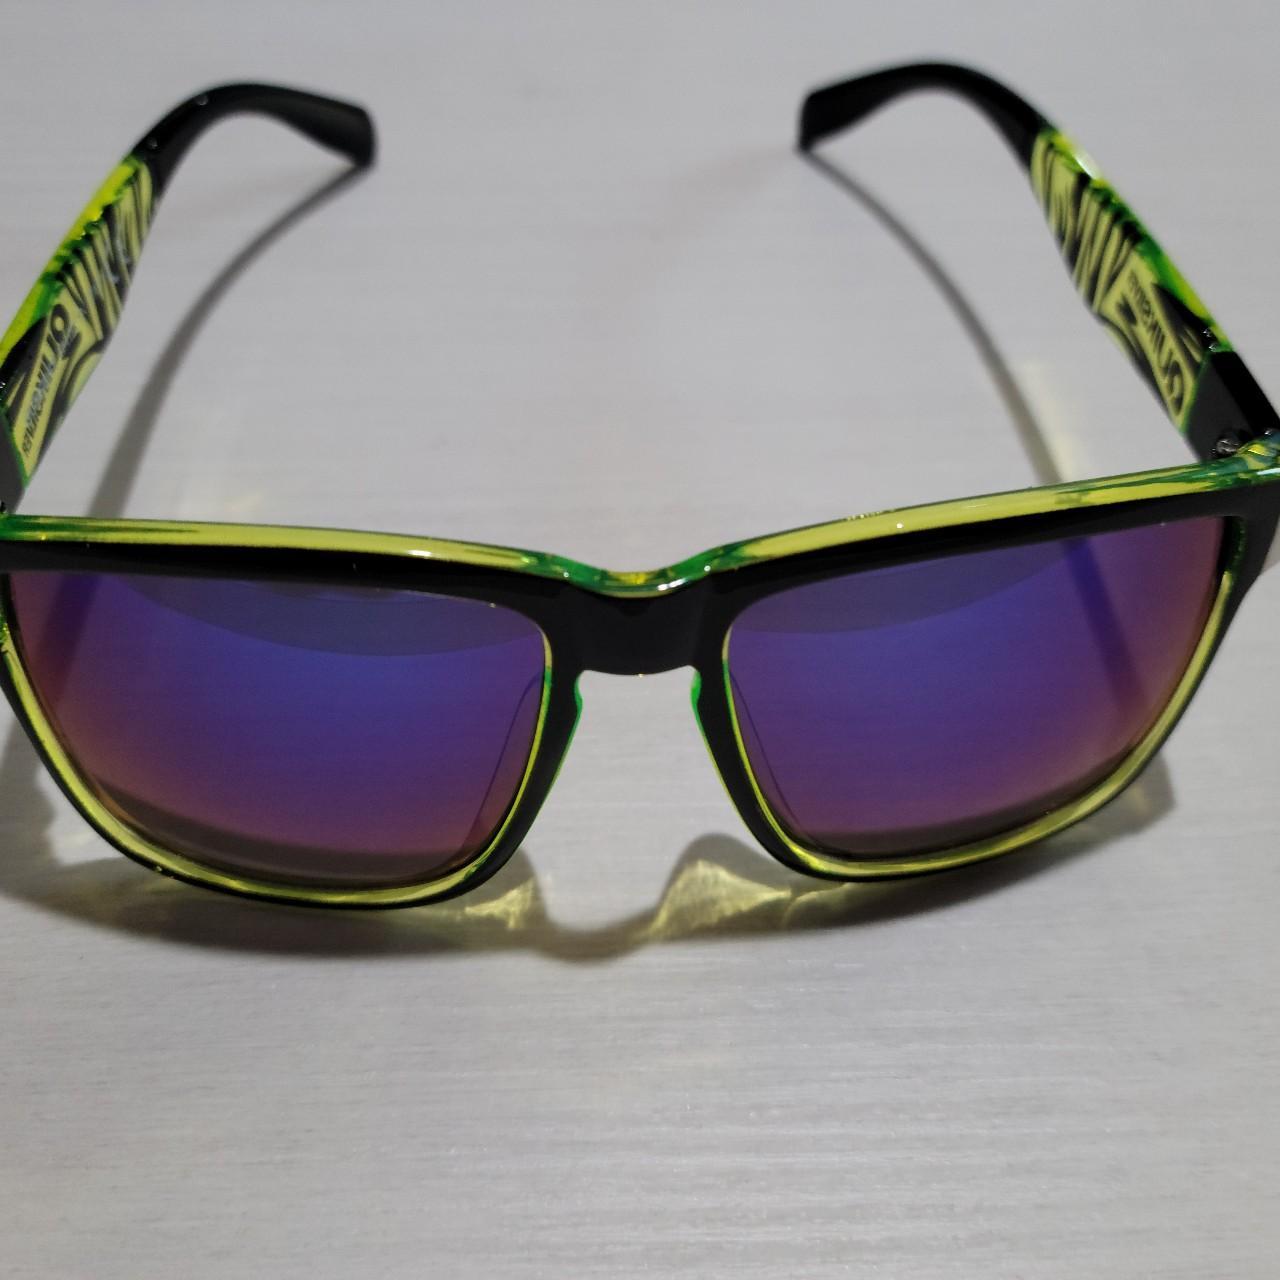 New polarized - sunglasses, quiksilver Depop black... green and